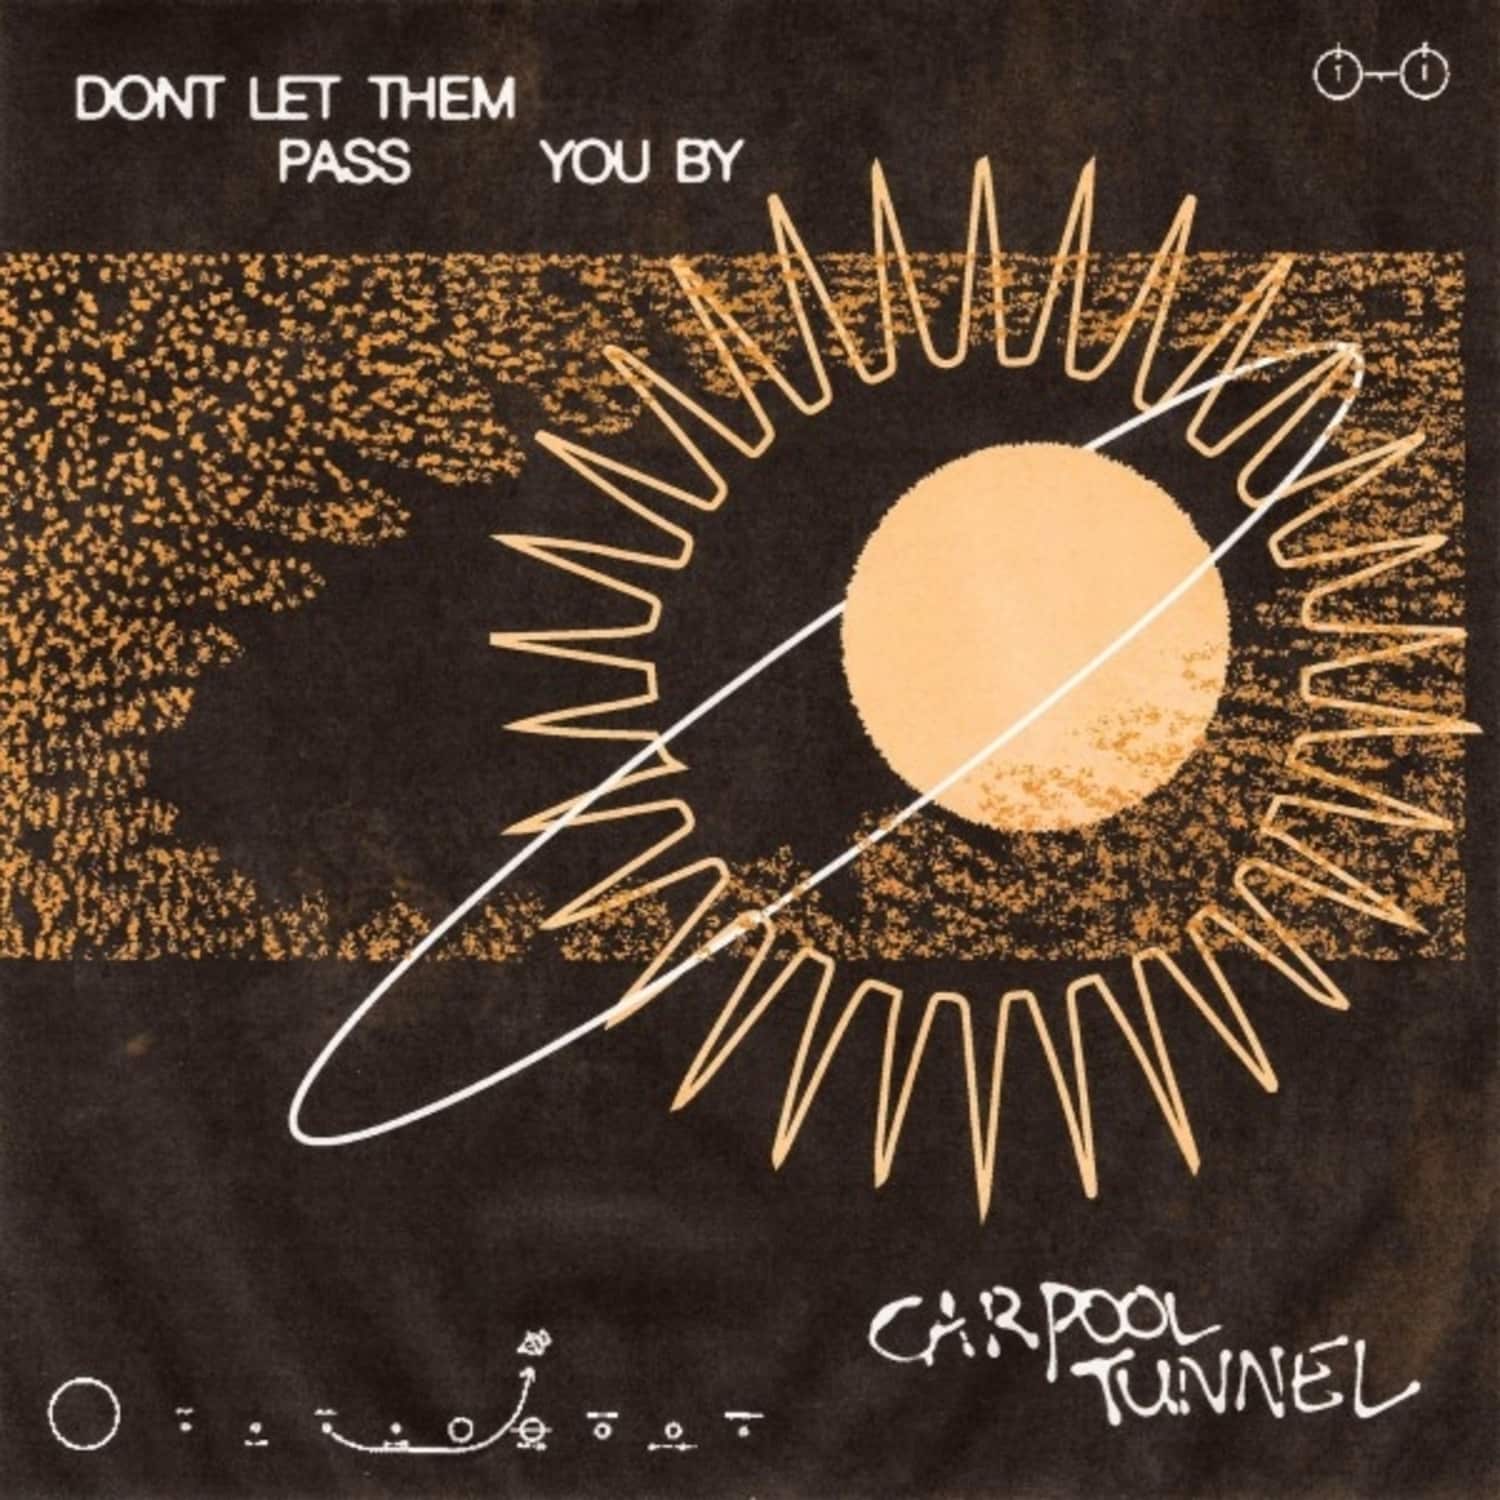 Carpool Tunnel - DON T LET THEM PASS YOU BY 